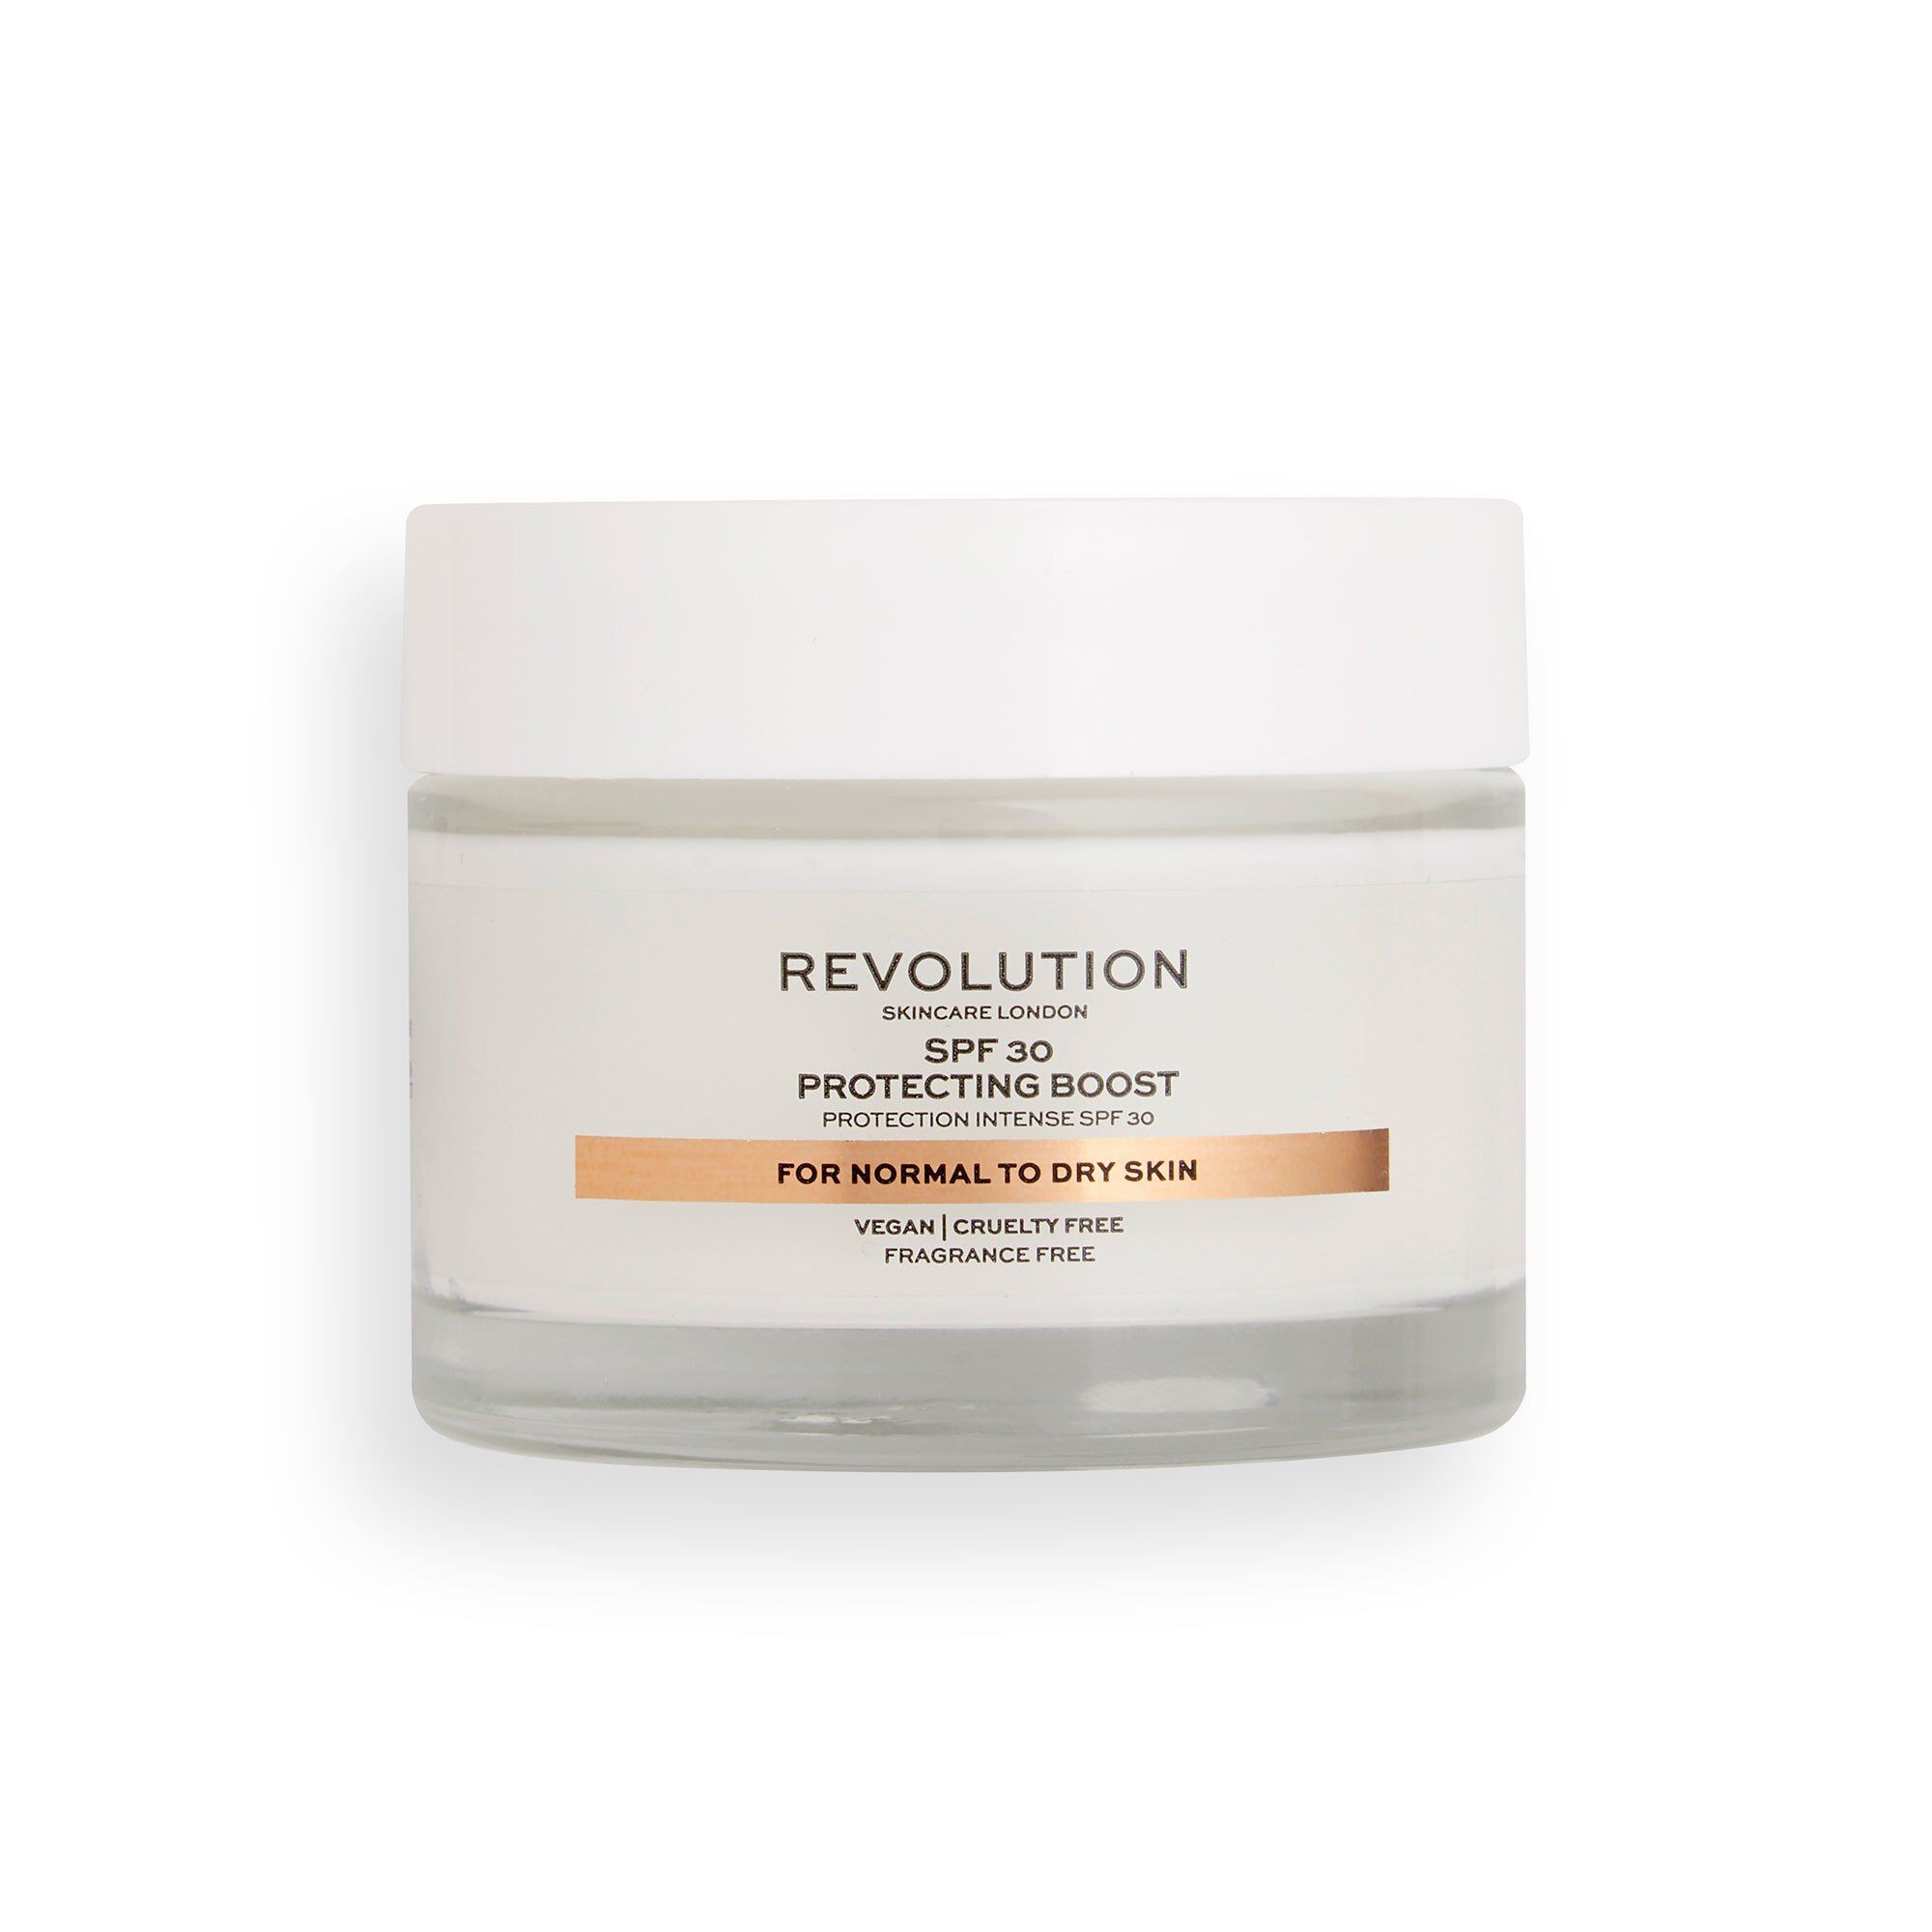 Moisture Cream - Protecting Boost SPF30 - Normal to Dry Skin 